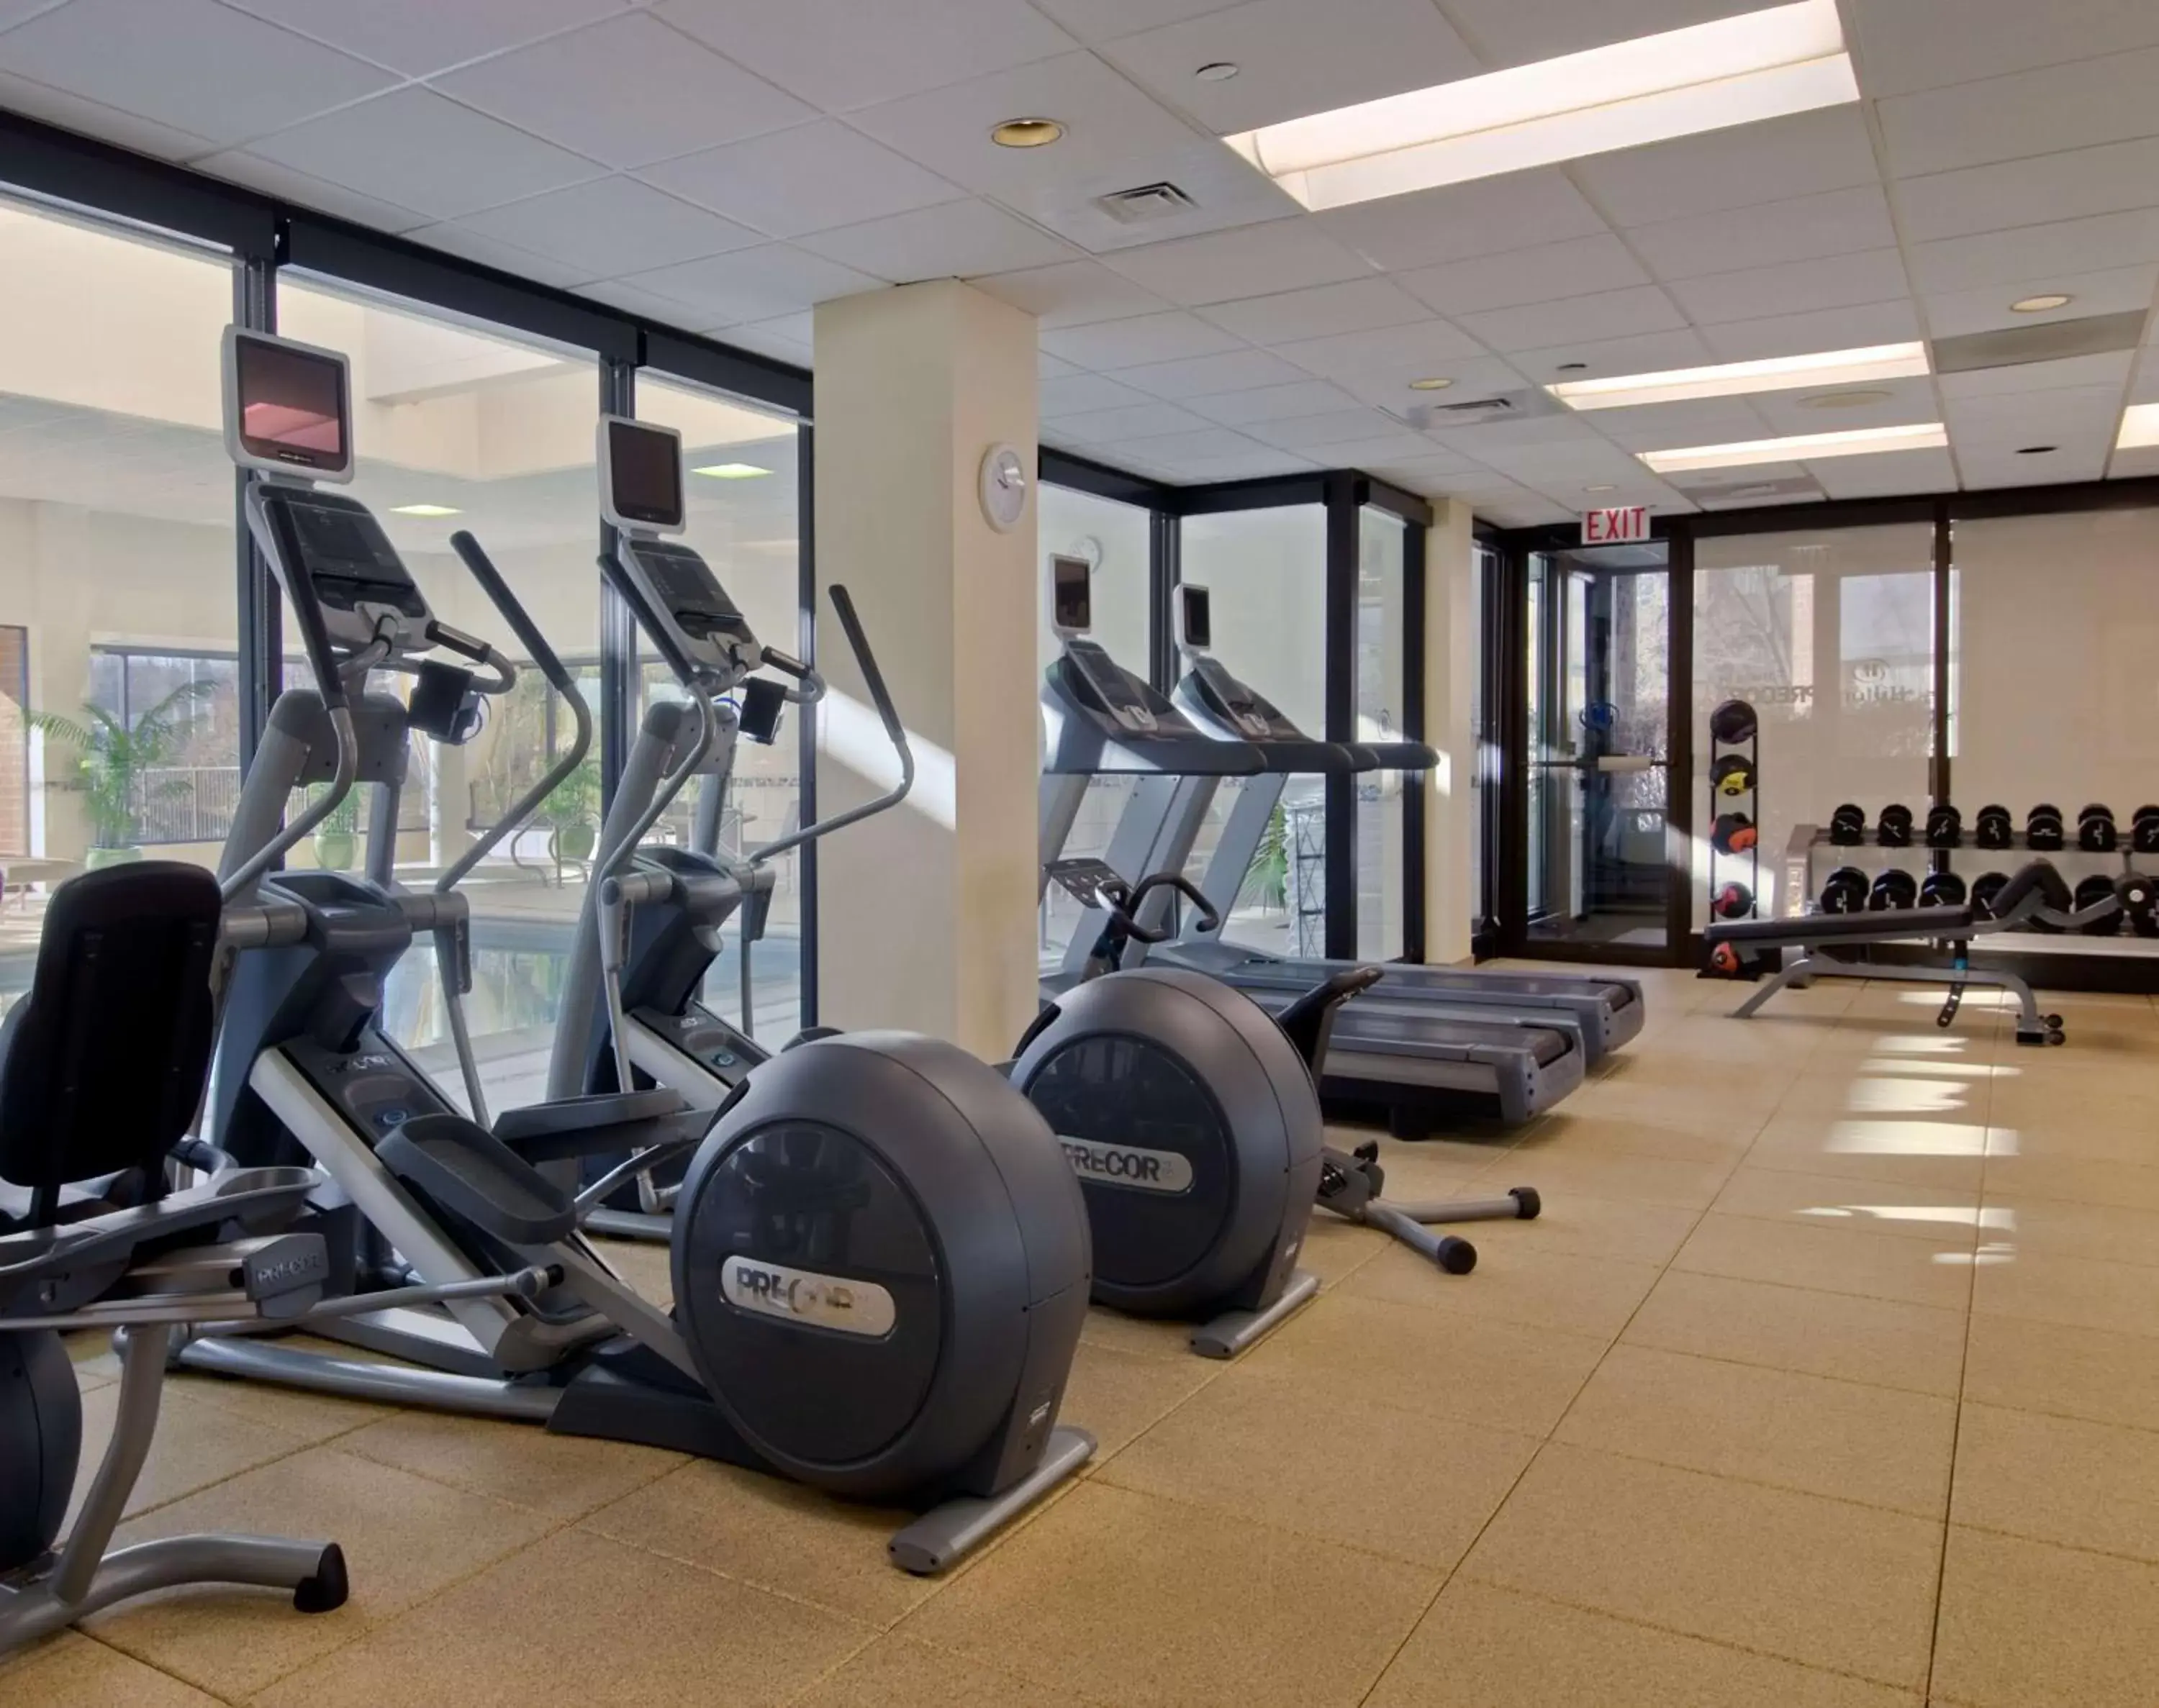 Fitness centre/facilities, Fitness Center/Facilities in DoubleTree by Hilton Lisle Naperville